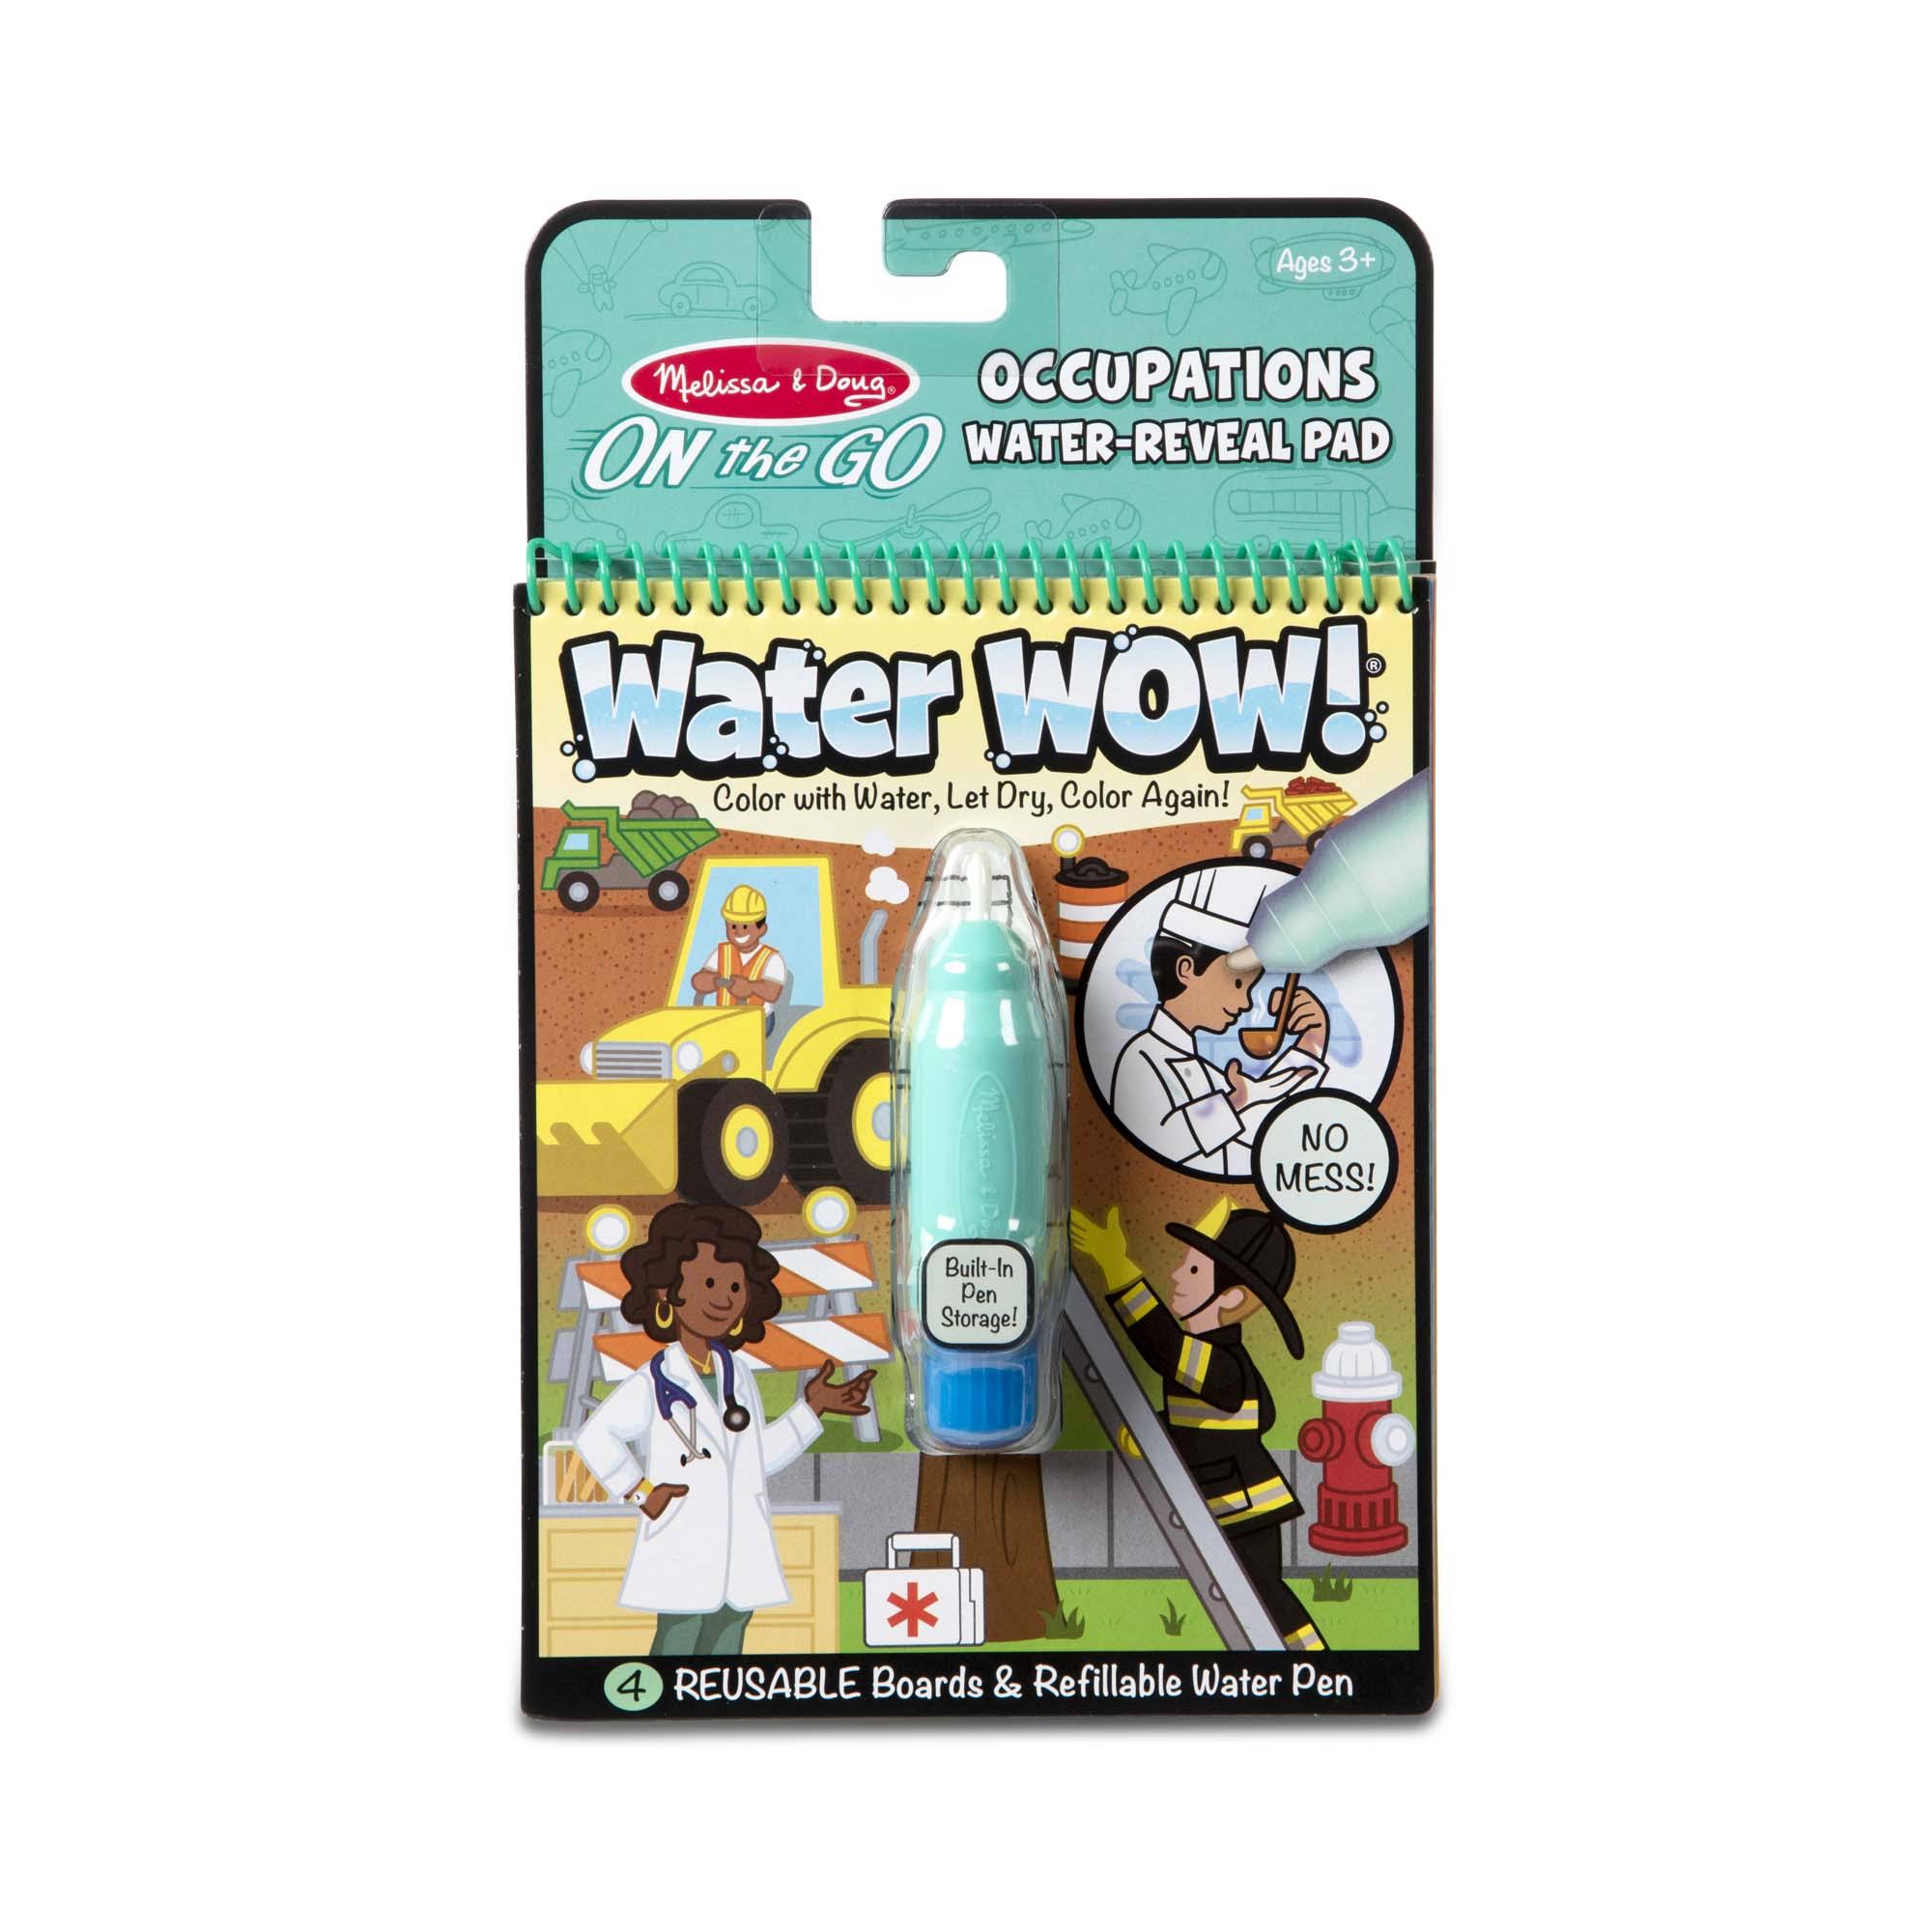 Melissa & Doug On the Go Activity Book Water Wow Occupations